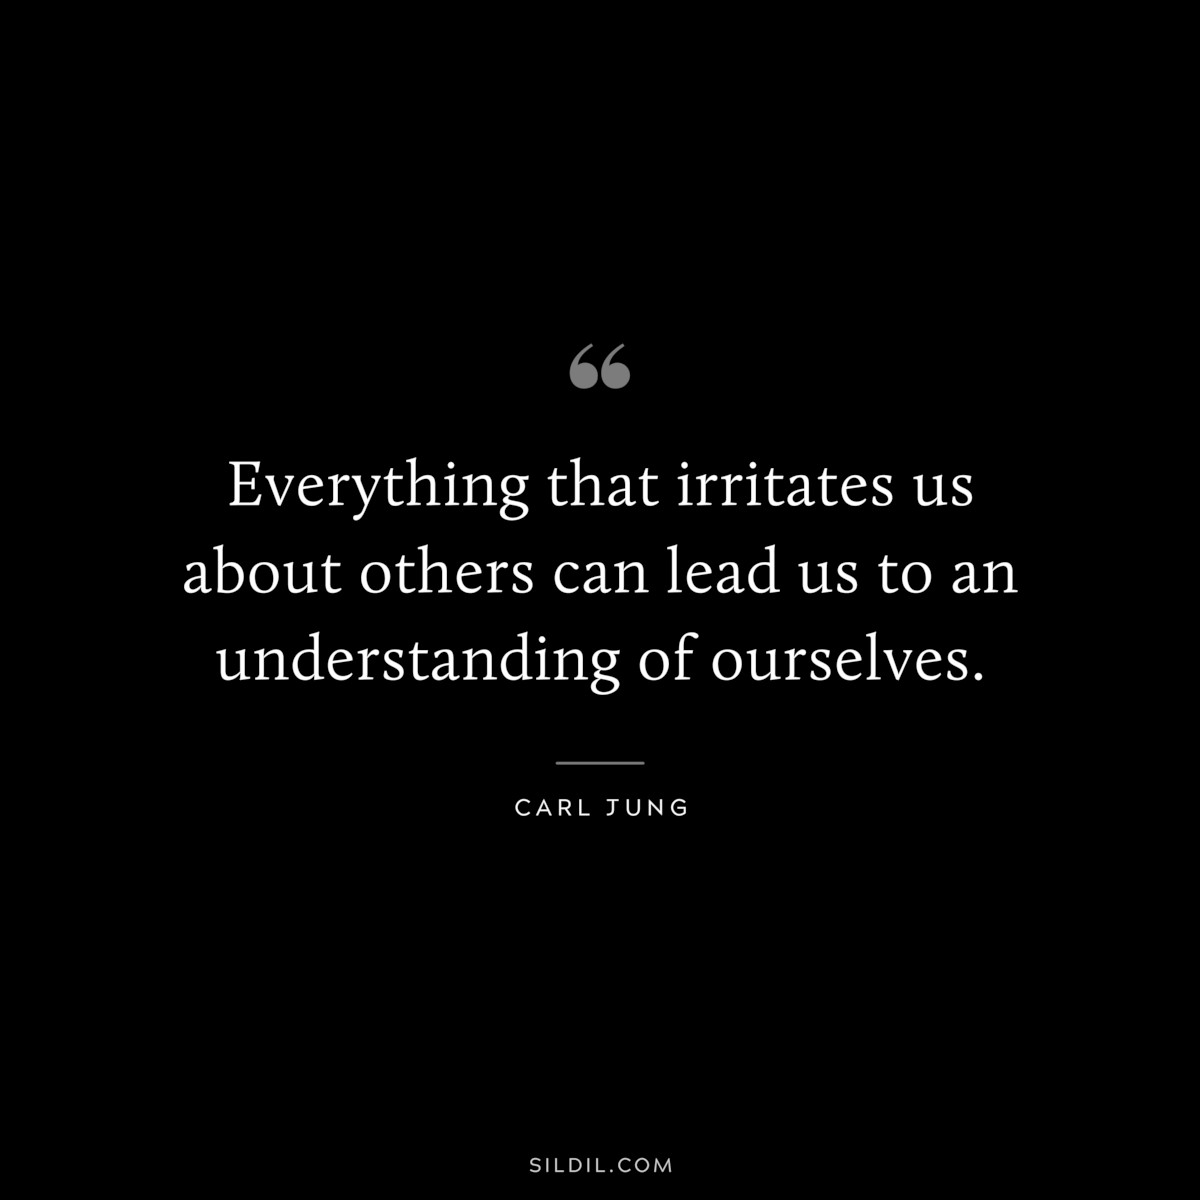 Everything that irritates us about others can lead us to an understanding of ourselves. ― Carl Jung